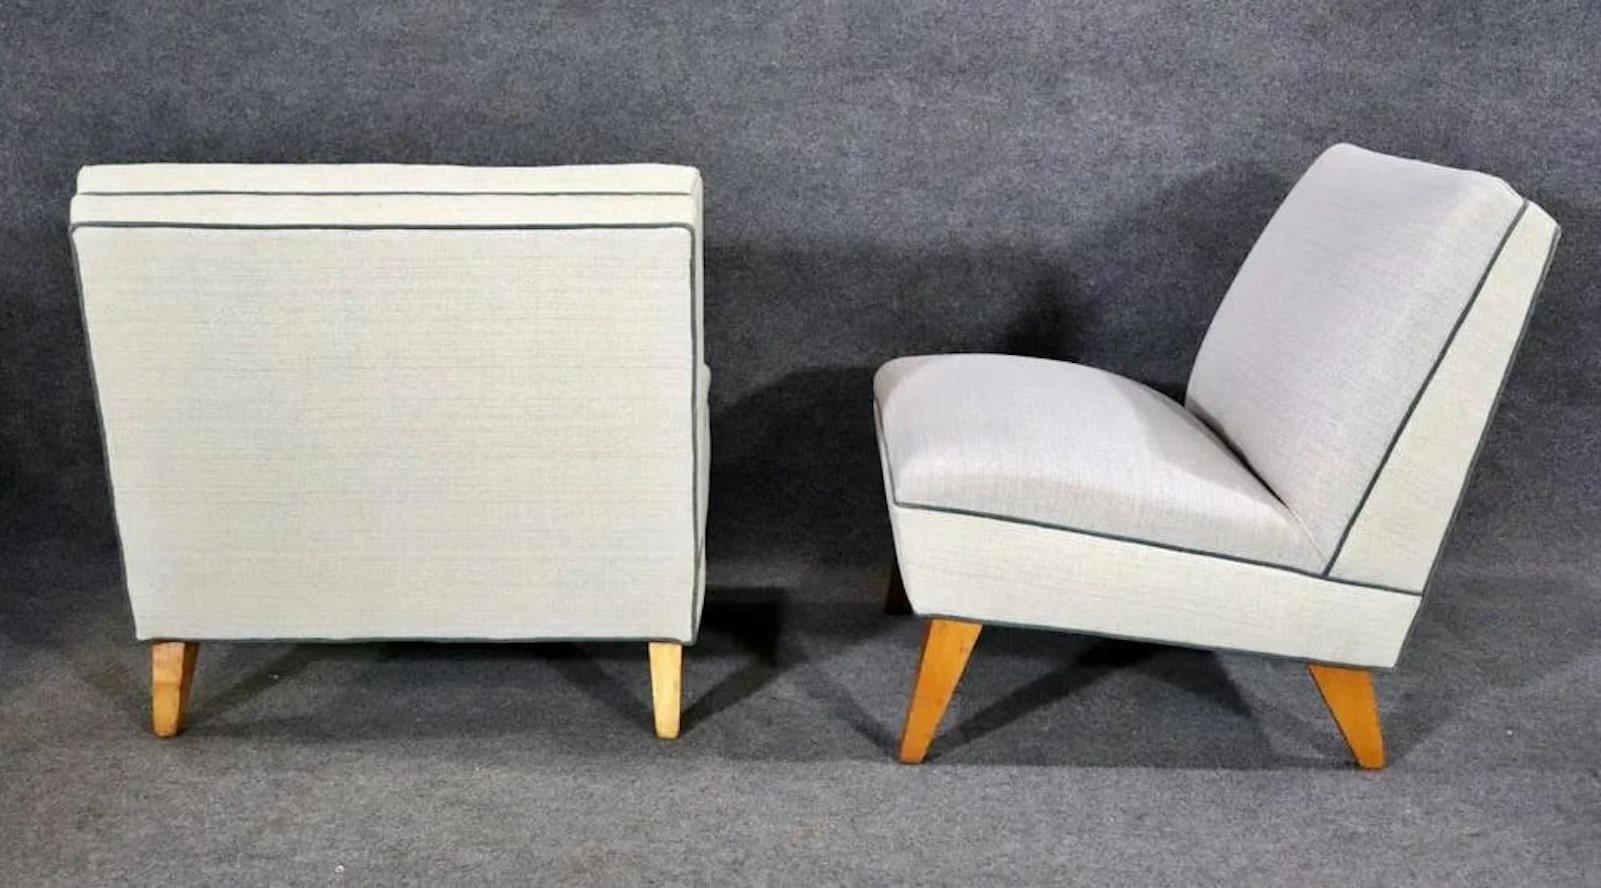 Pair of slipper chairs with wood legs peeking through the all fabric chairs. Blue piping around the off white fabric.
Please confirm location NY or NJ.